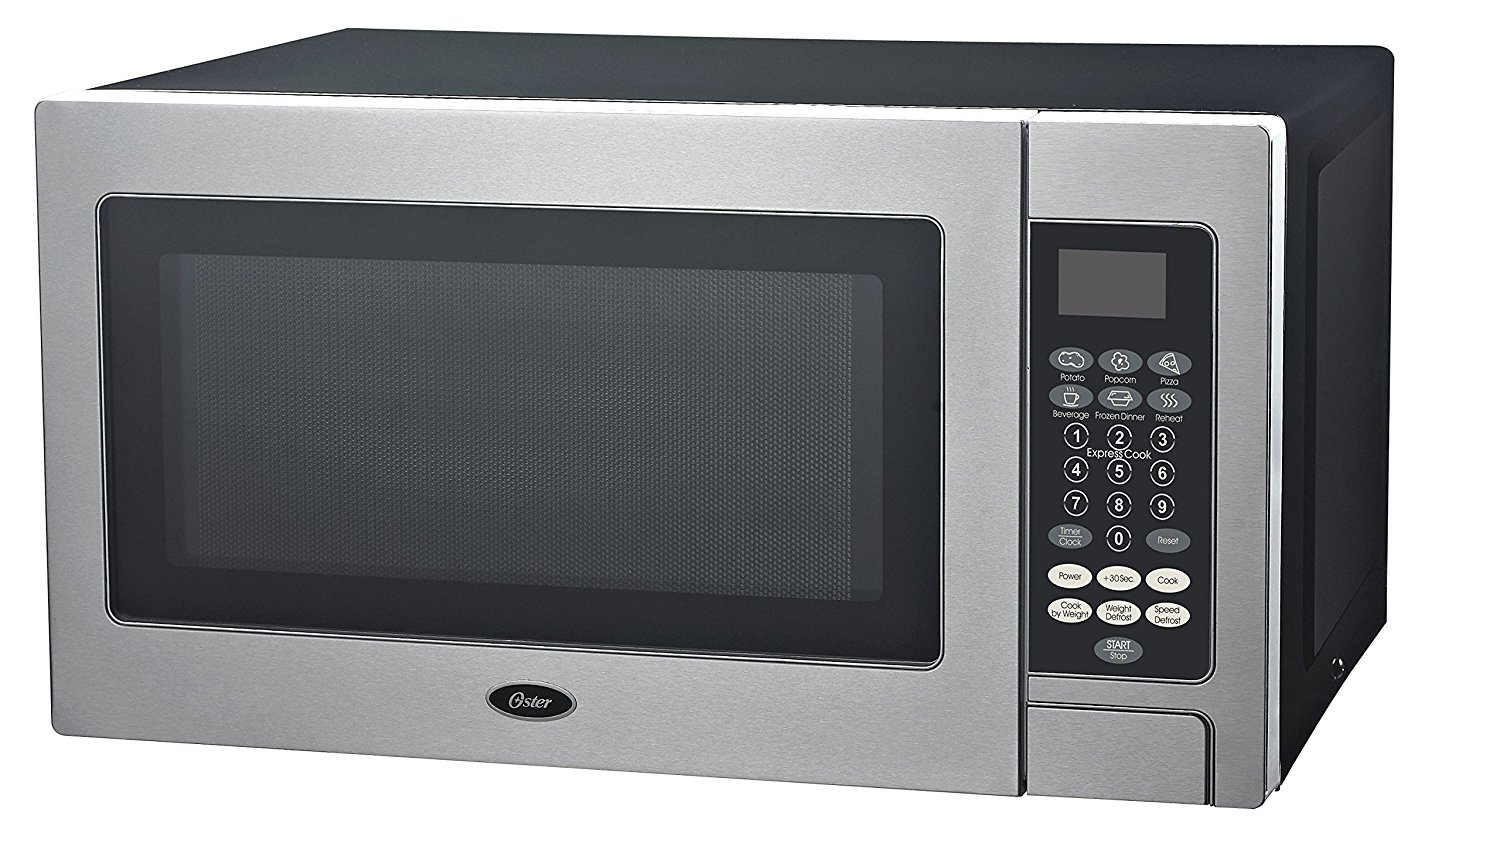 Oster OGZD0701 Microwave Oven, Stainless Steel